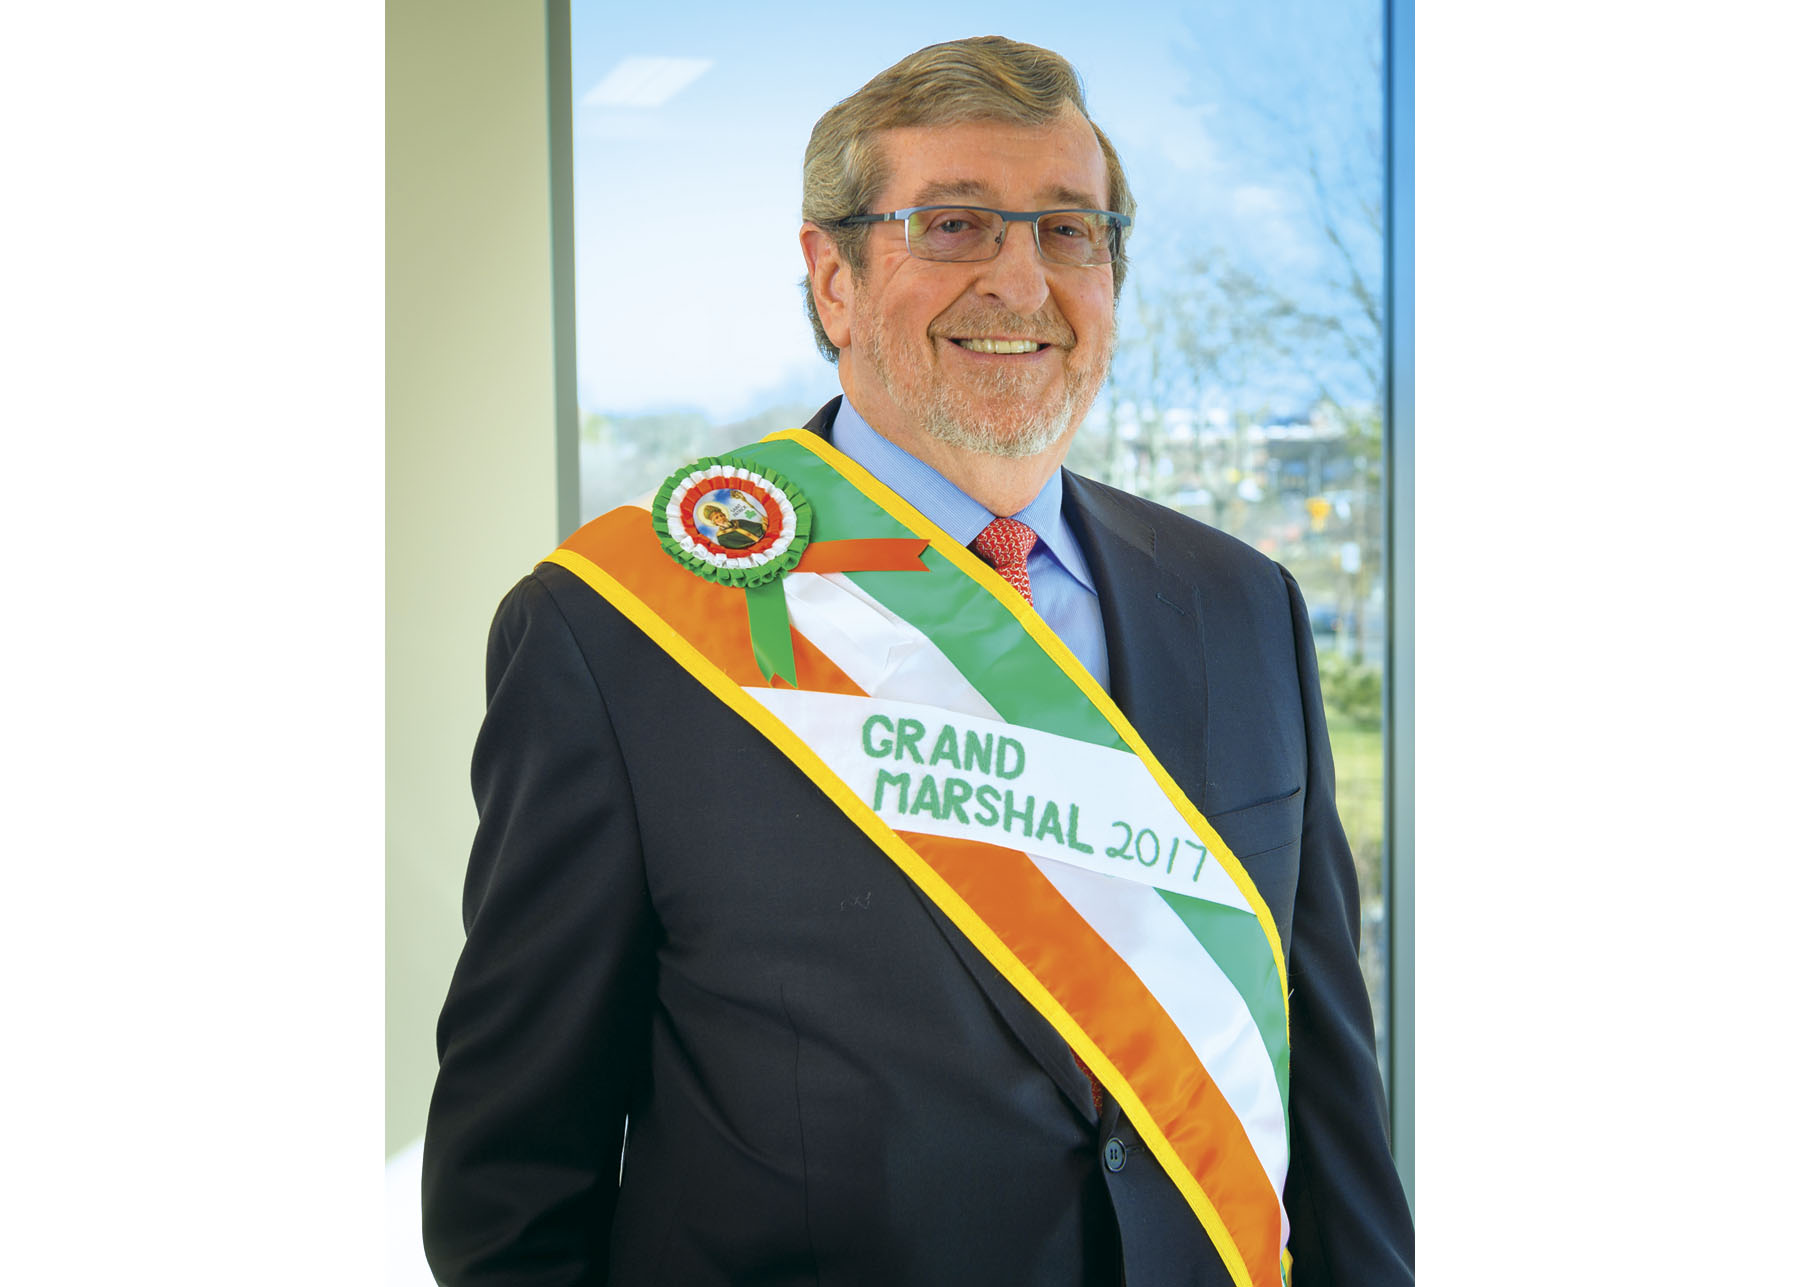 Michael Dowling is the 2017 New York City St. Patrick’s Day Parade Grand Marshal.